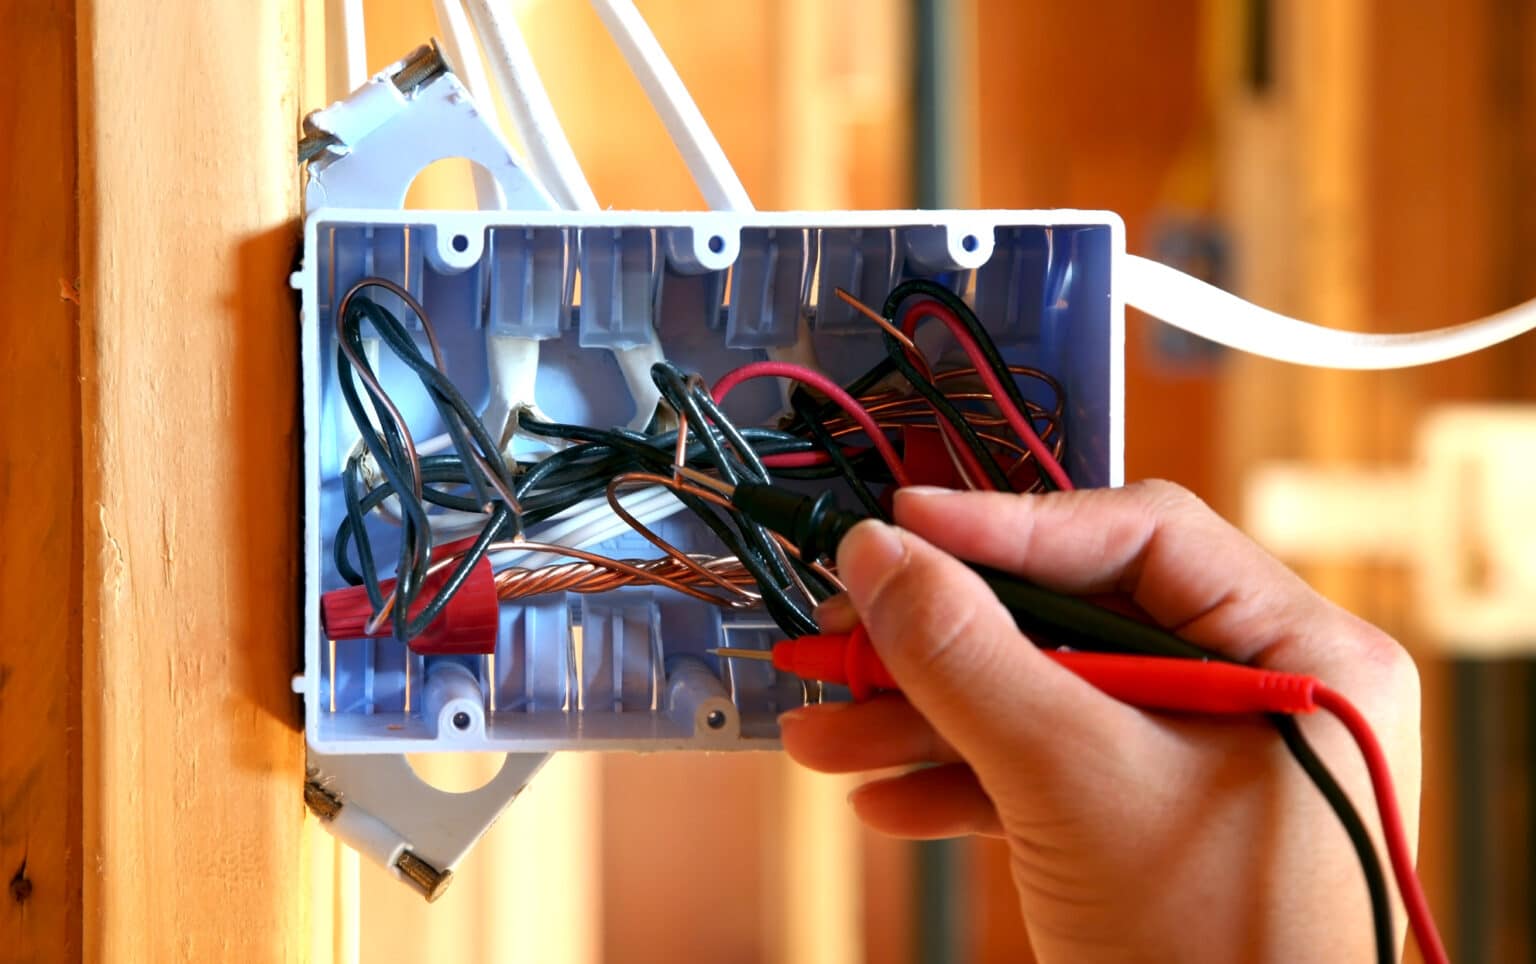 What To Know About Light Switch Wiring Before Trying DIY Electrical Work